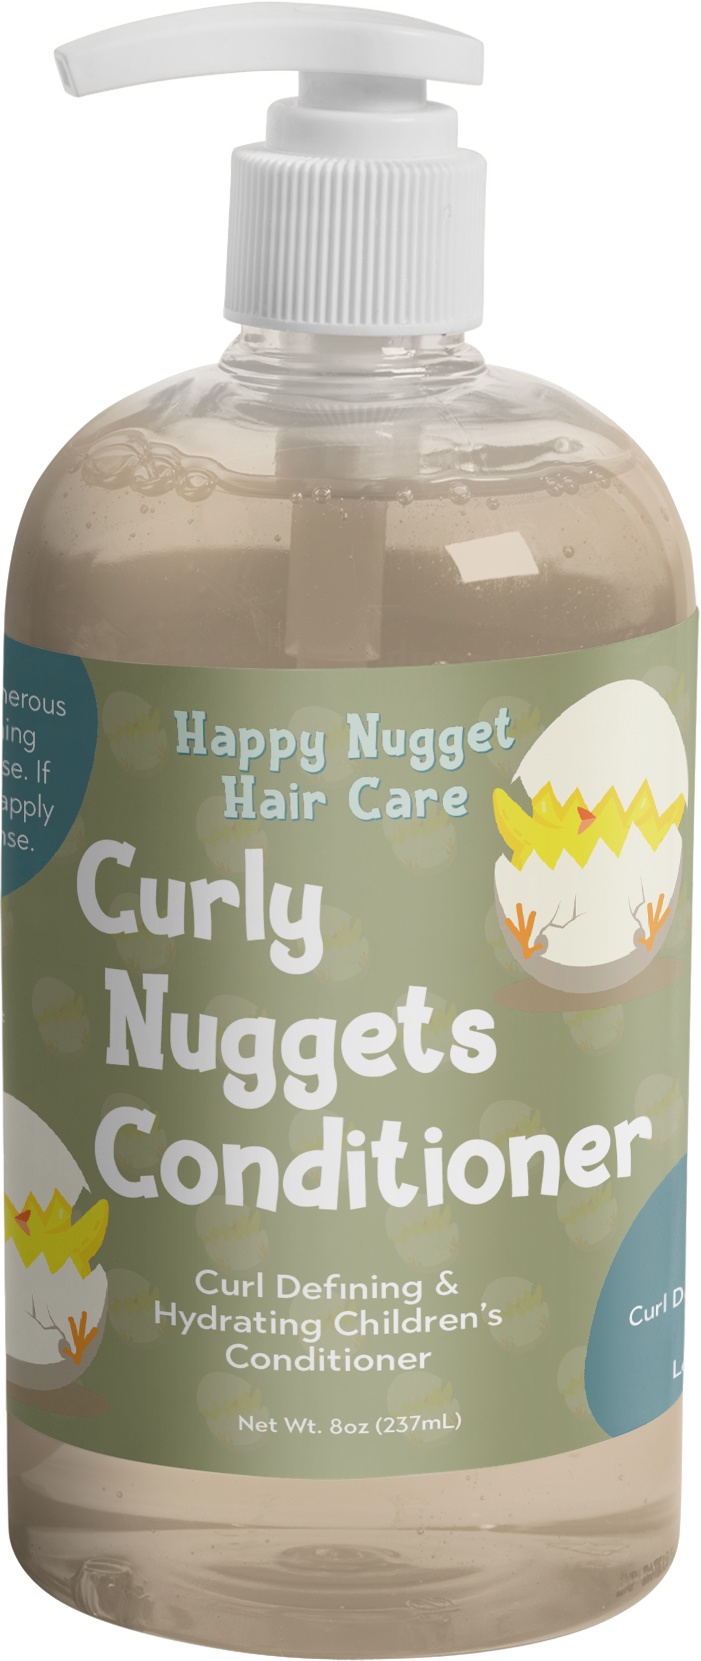 Happy Nugget Hair Care Curly Nugget Conditioner